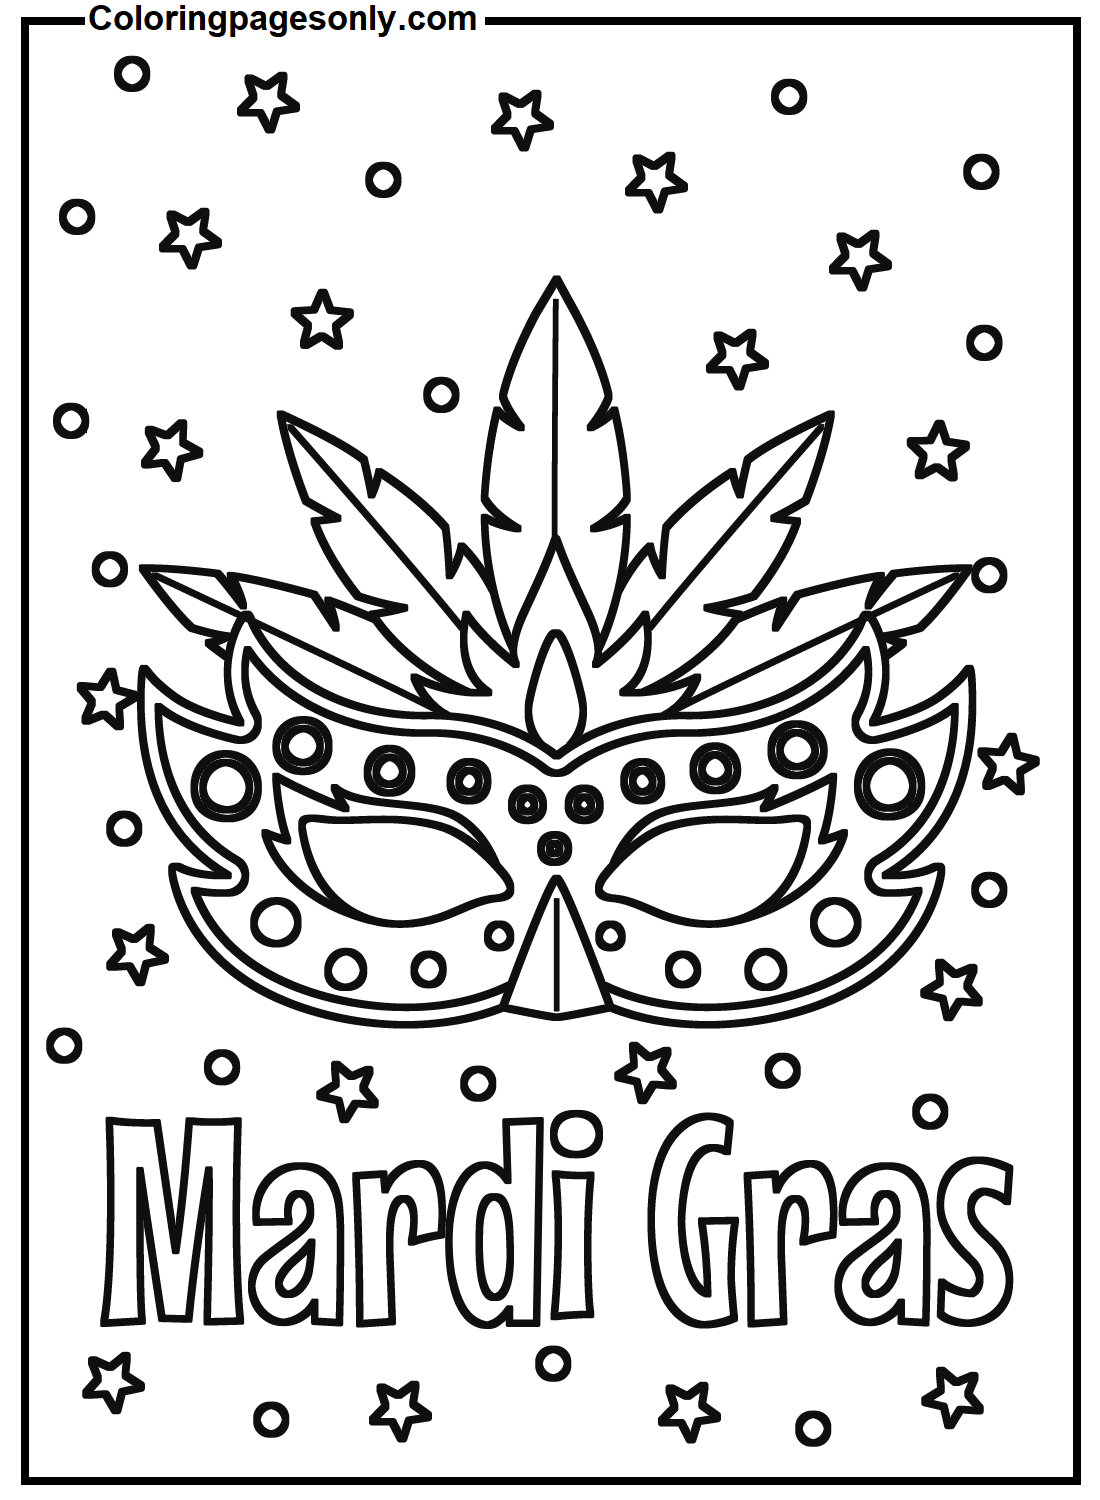 Free Mardi Gras Coloring Pages